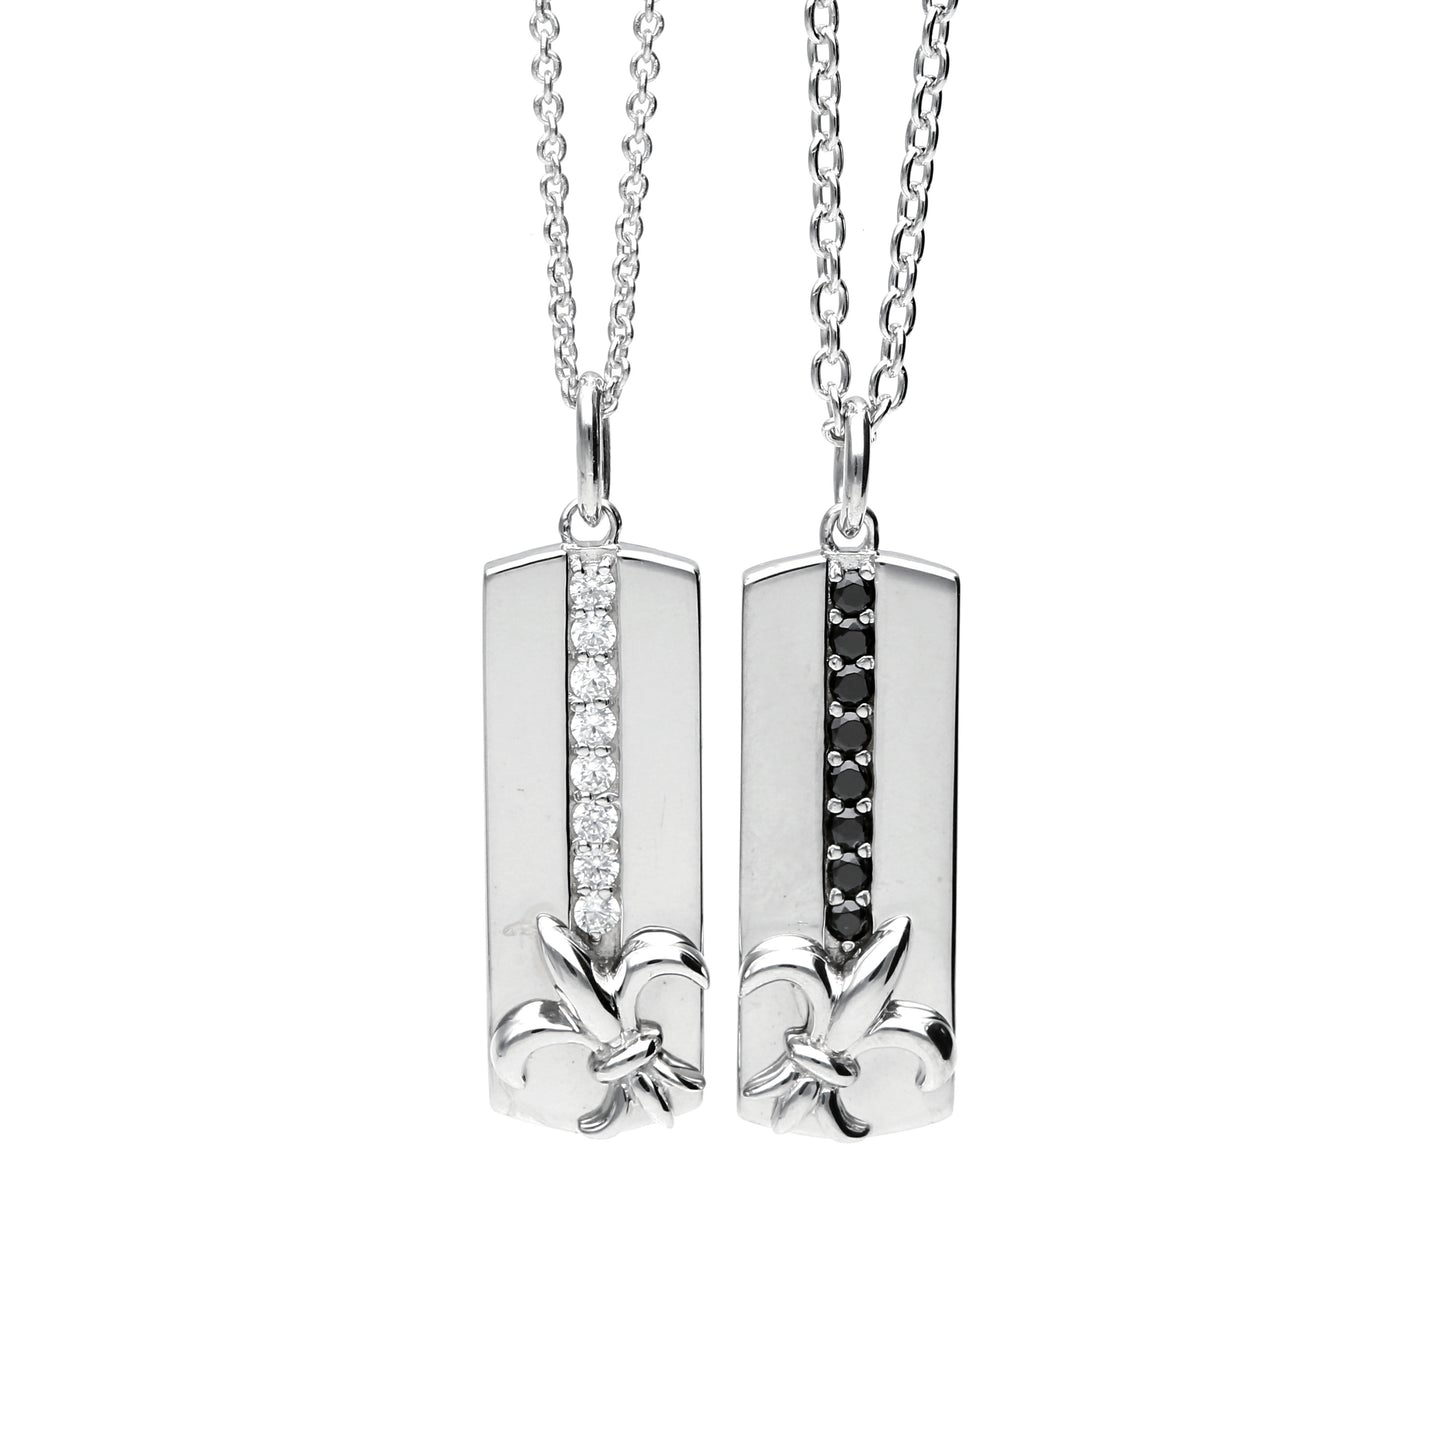 Pair Necklace | 95-2600-2601